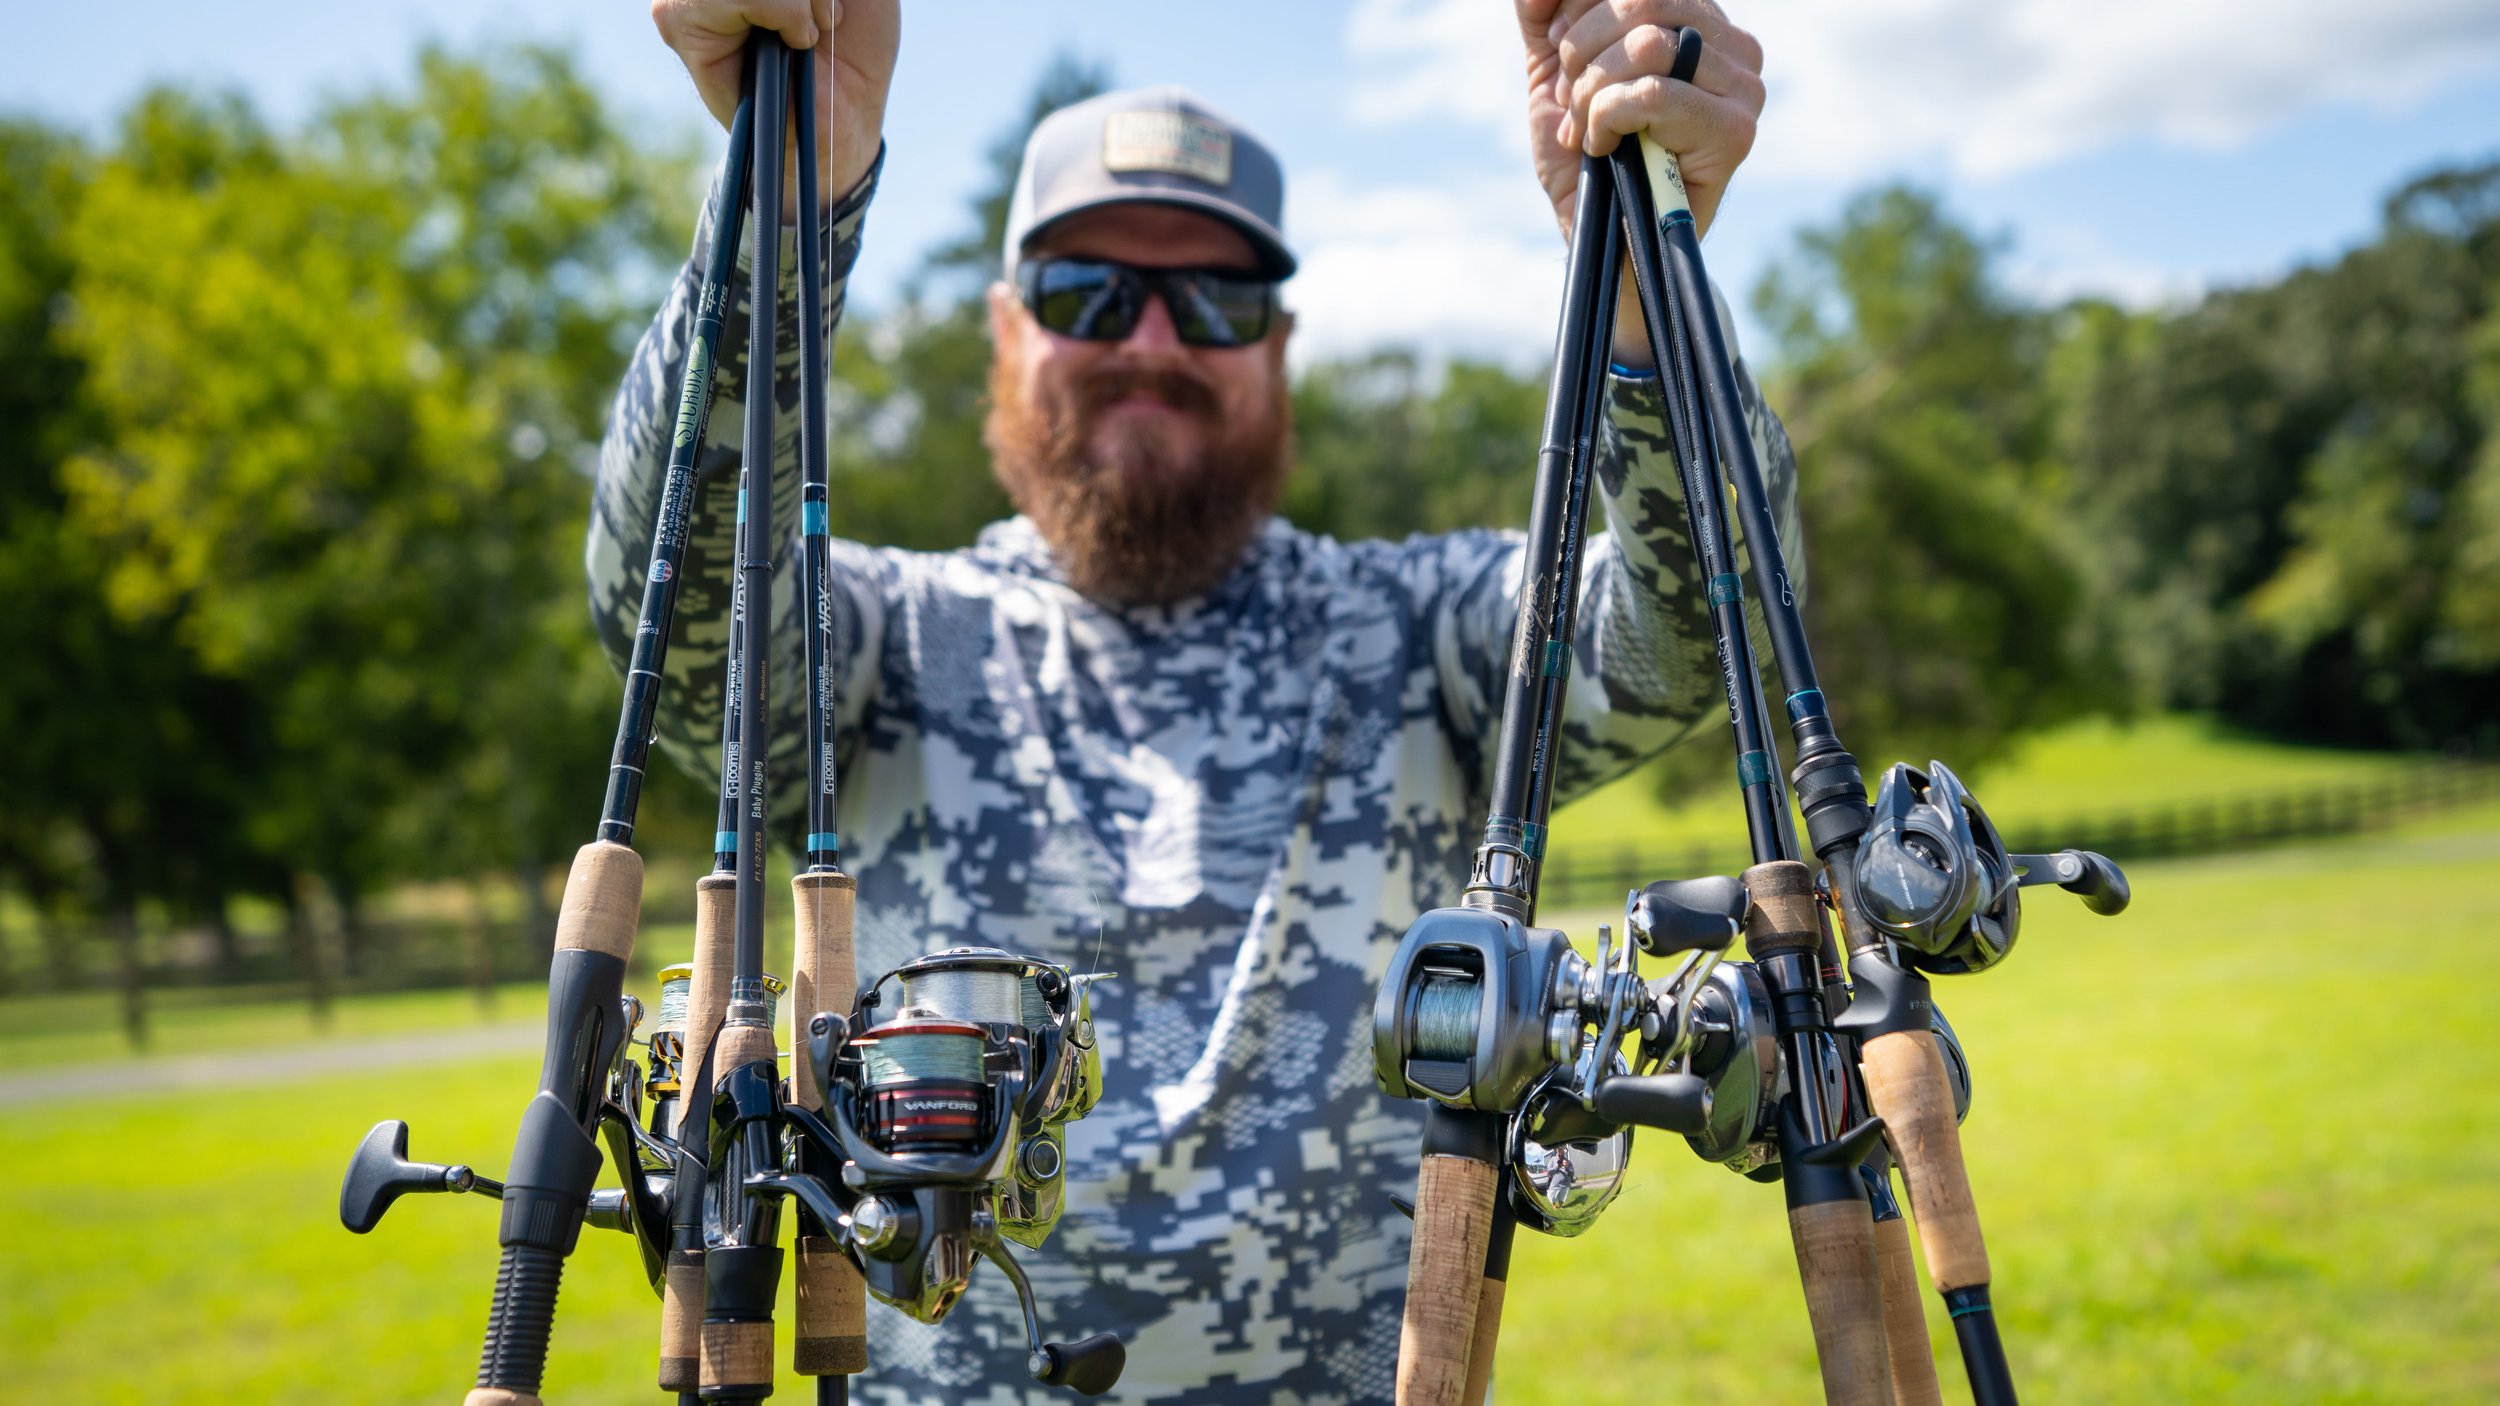 BUYER'S GUIDE: Ultra HIGH END Rod And Reel Combos! The BEST